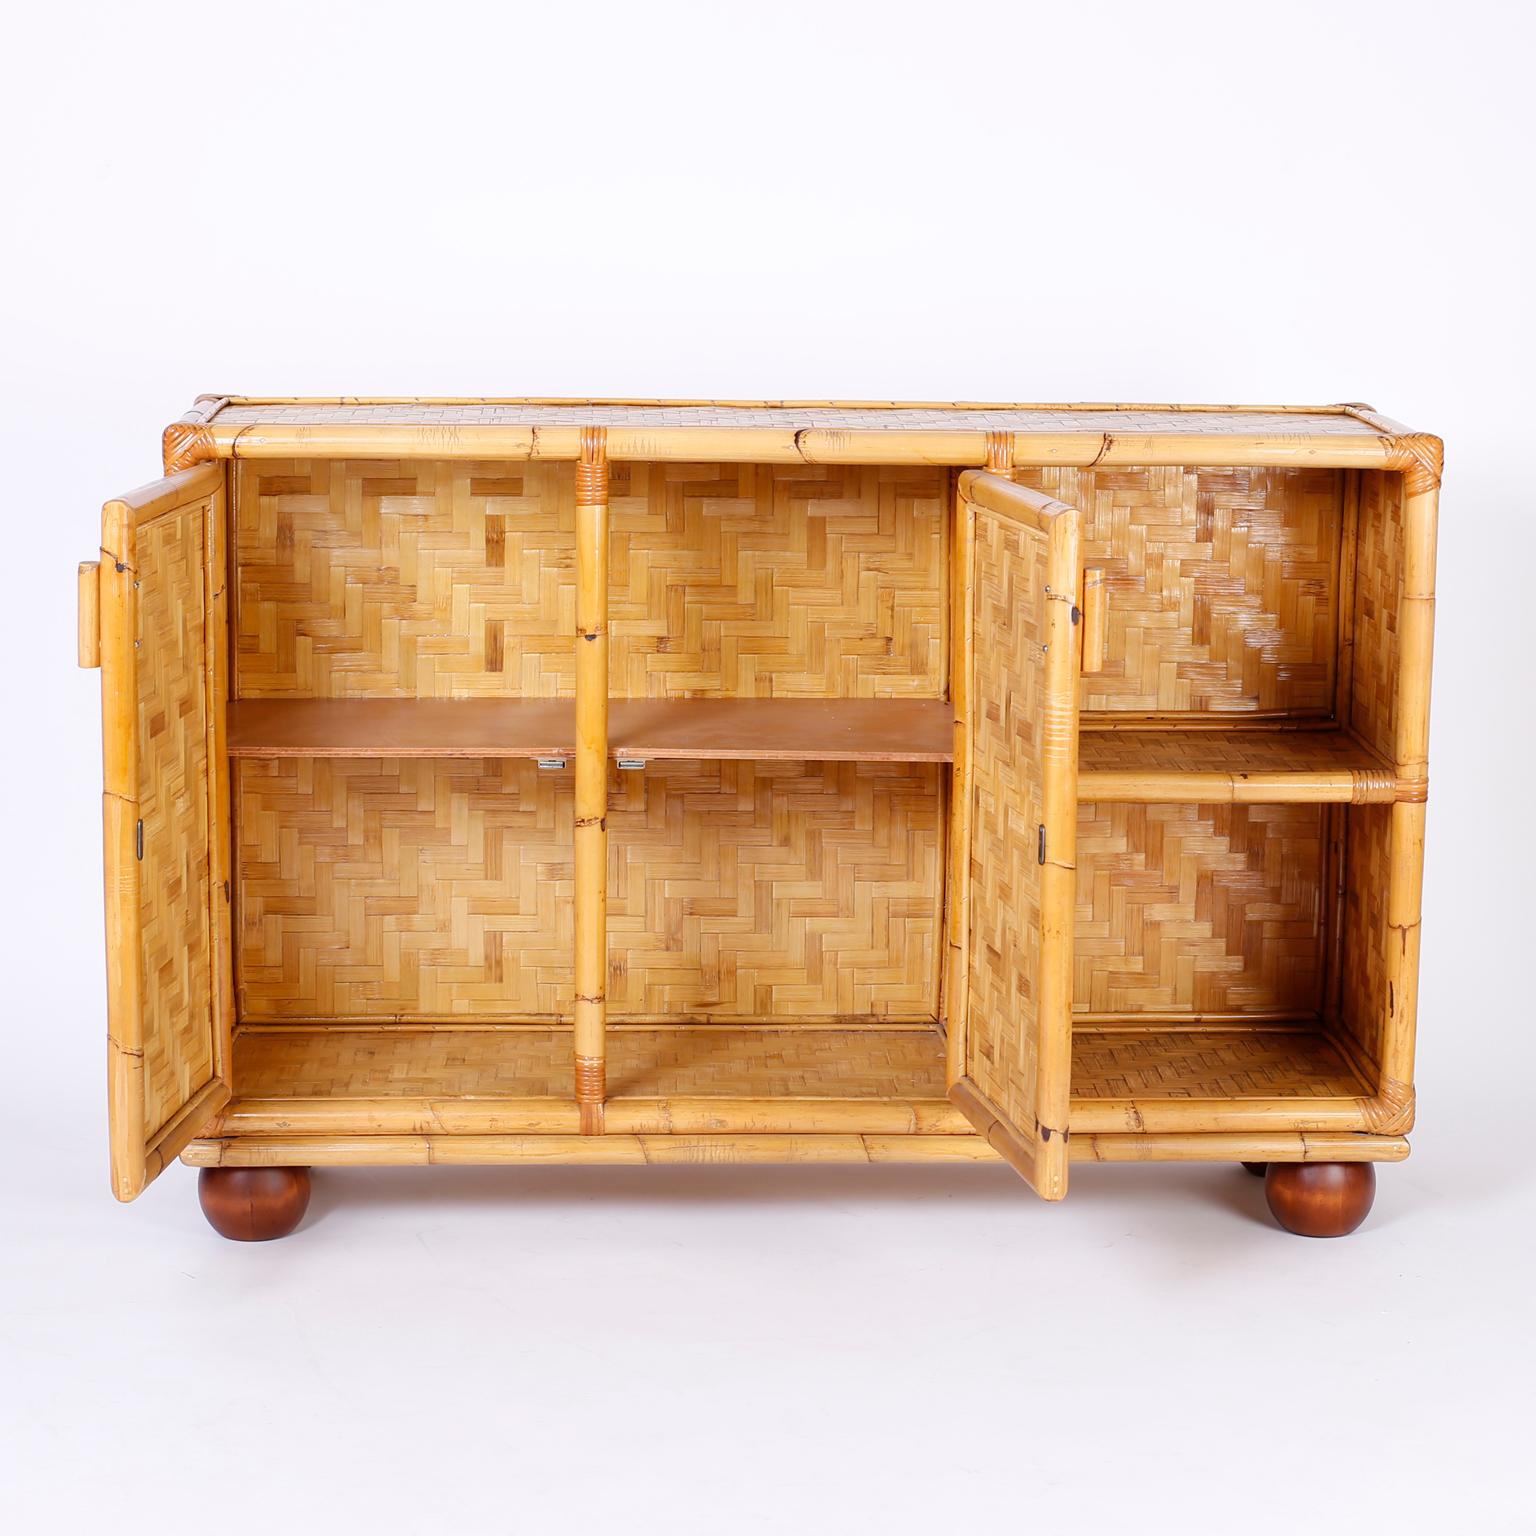 20th Century Midcentury Bamboo and Wicker Cabinet or Server